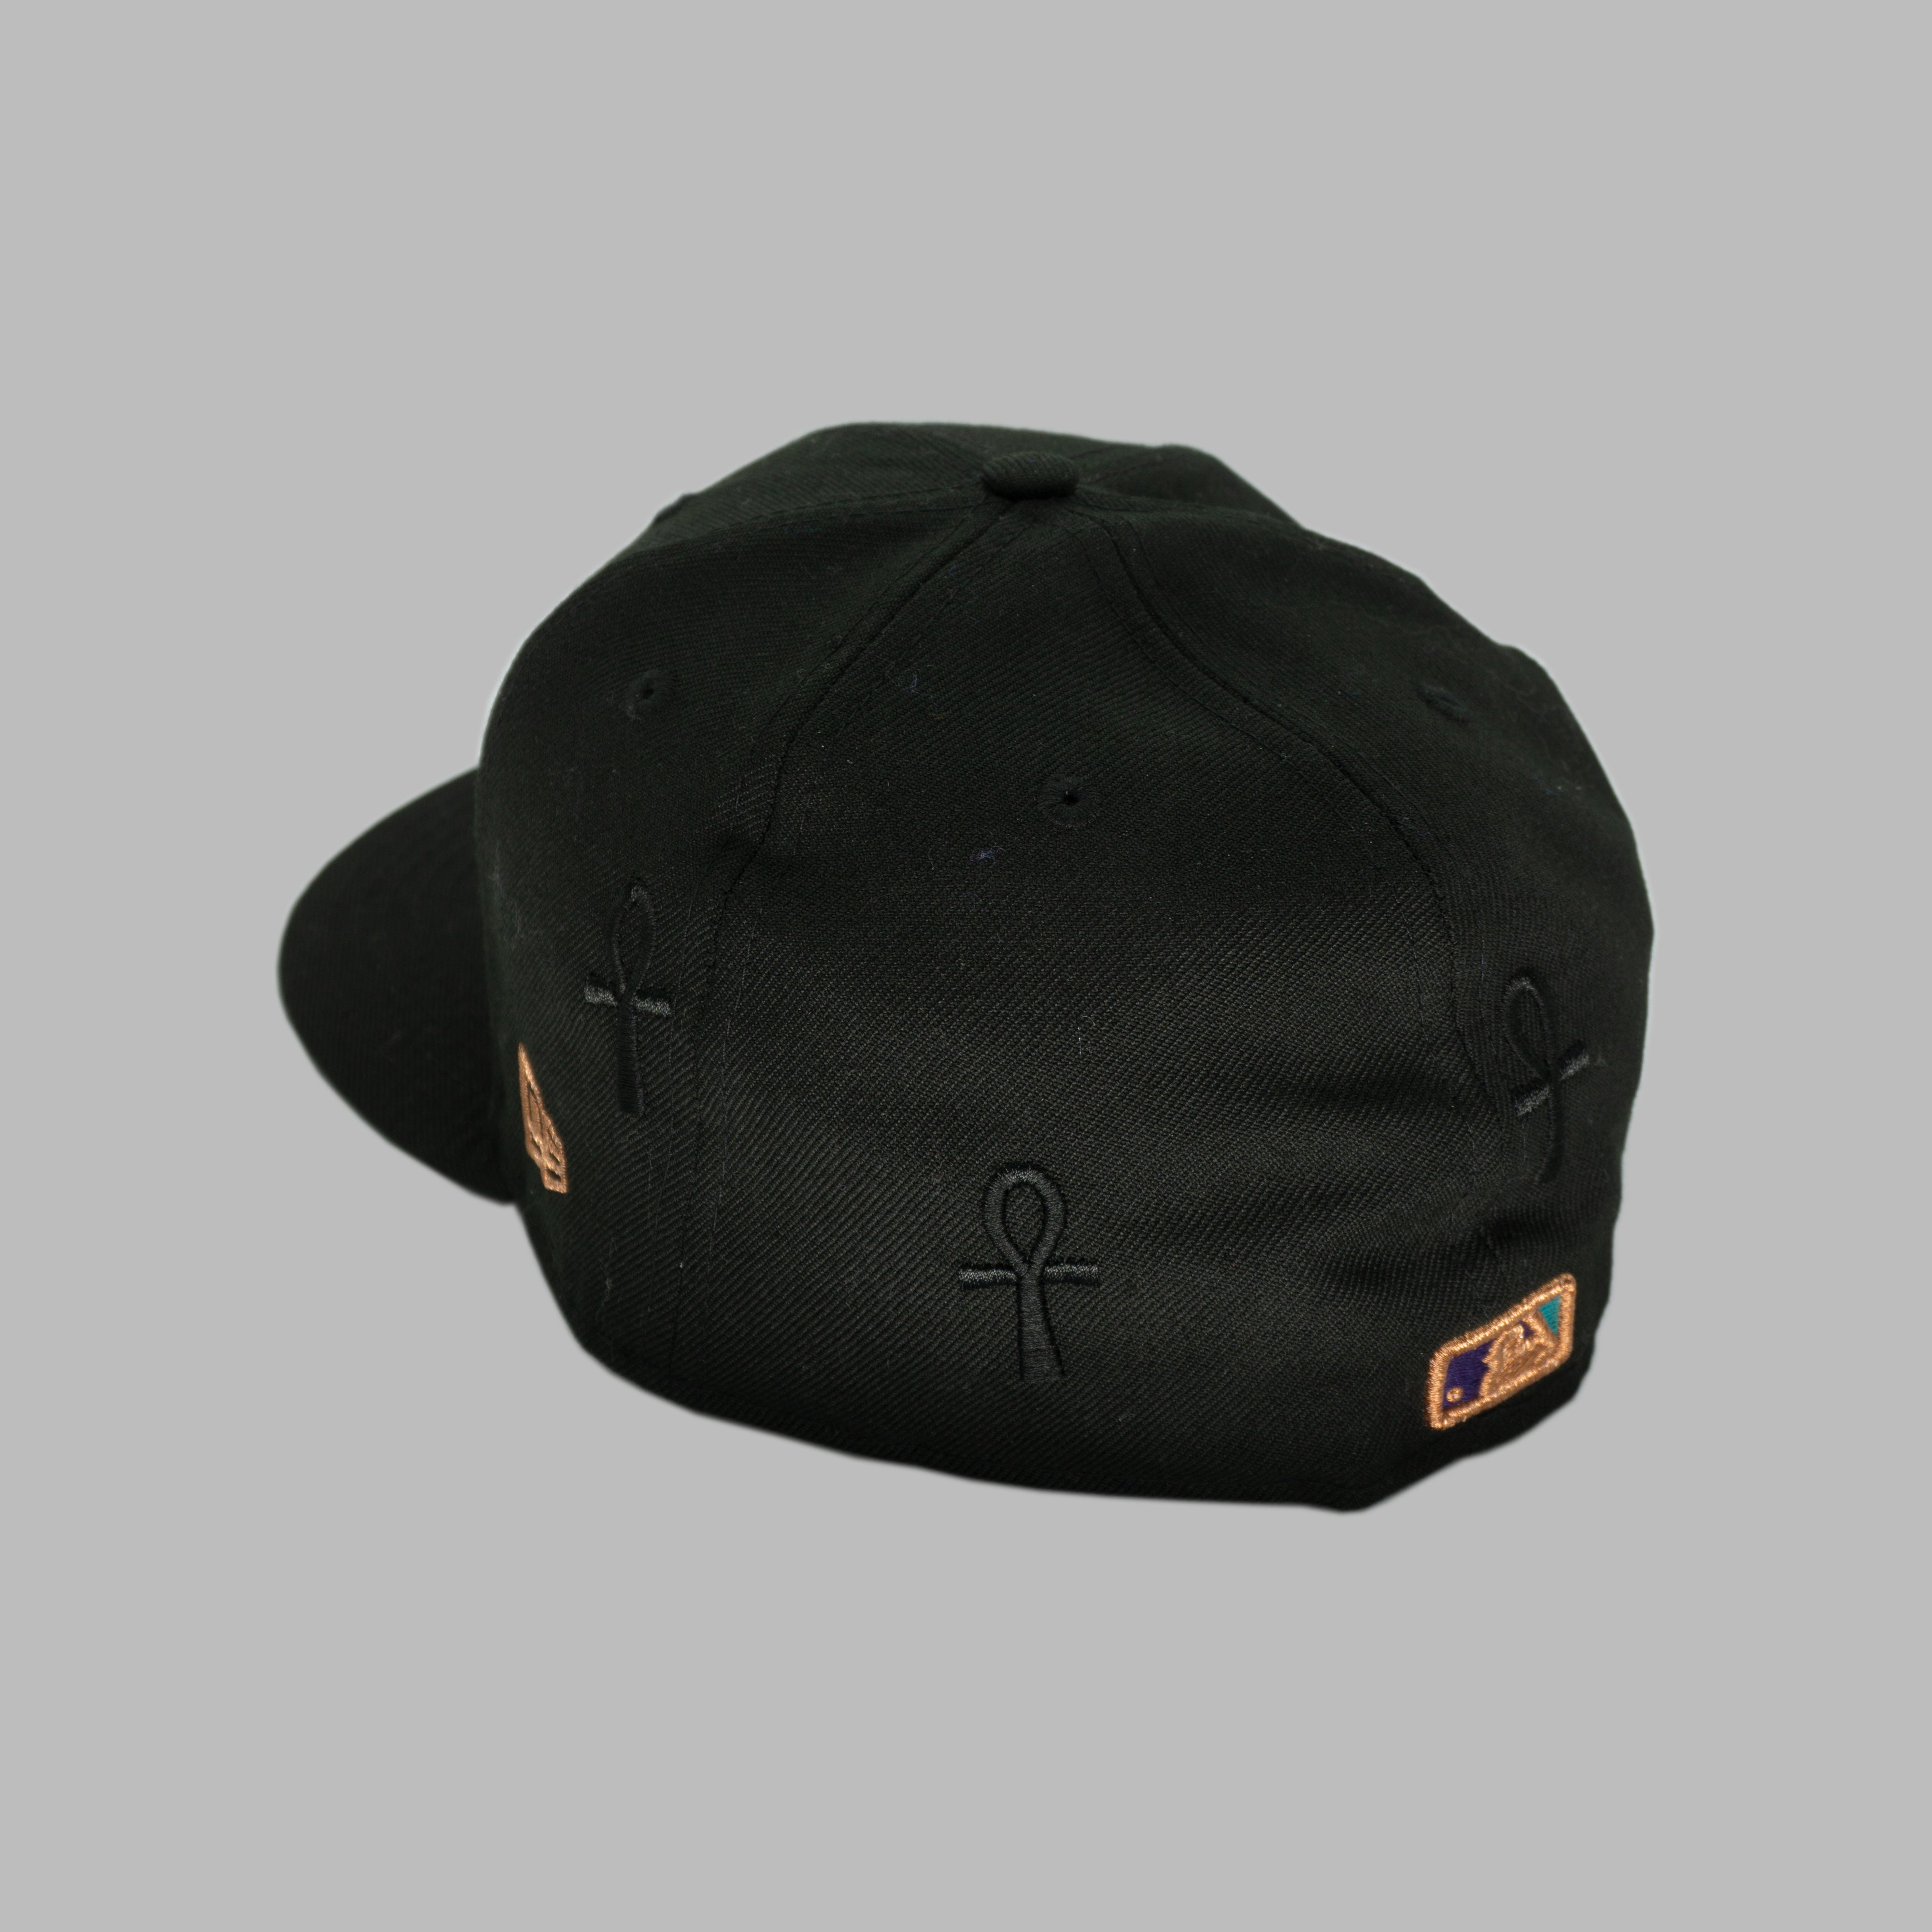 BLACK BEYOND FITTED (size 7 3/4)